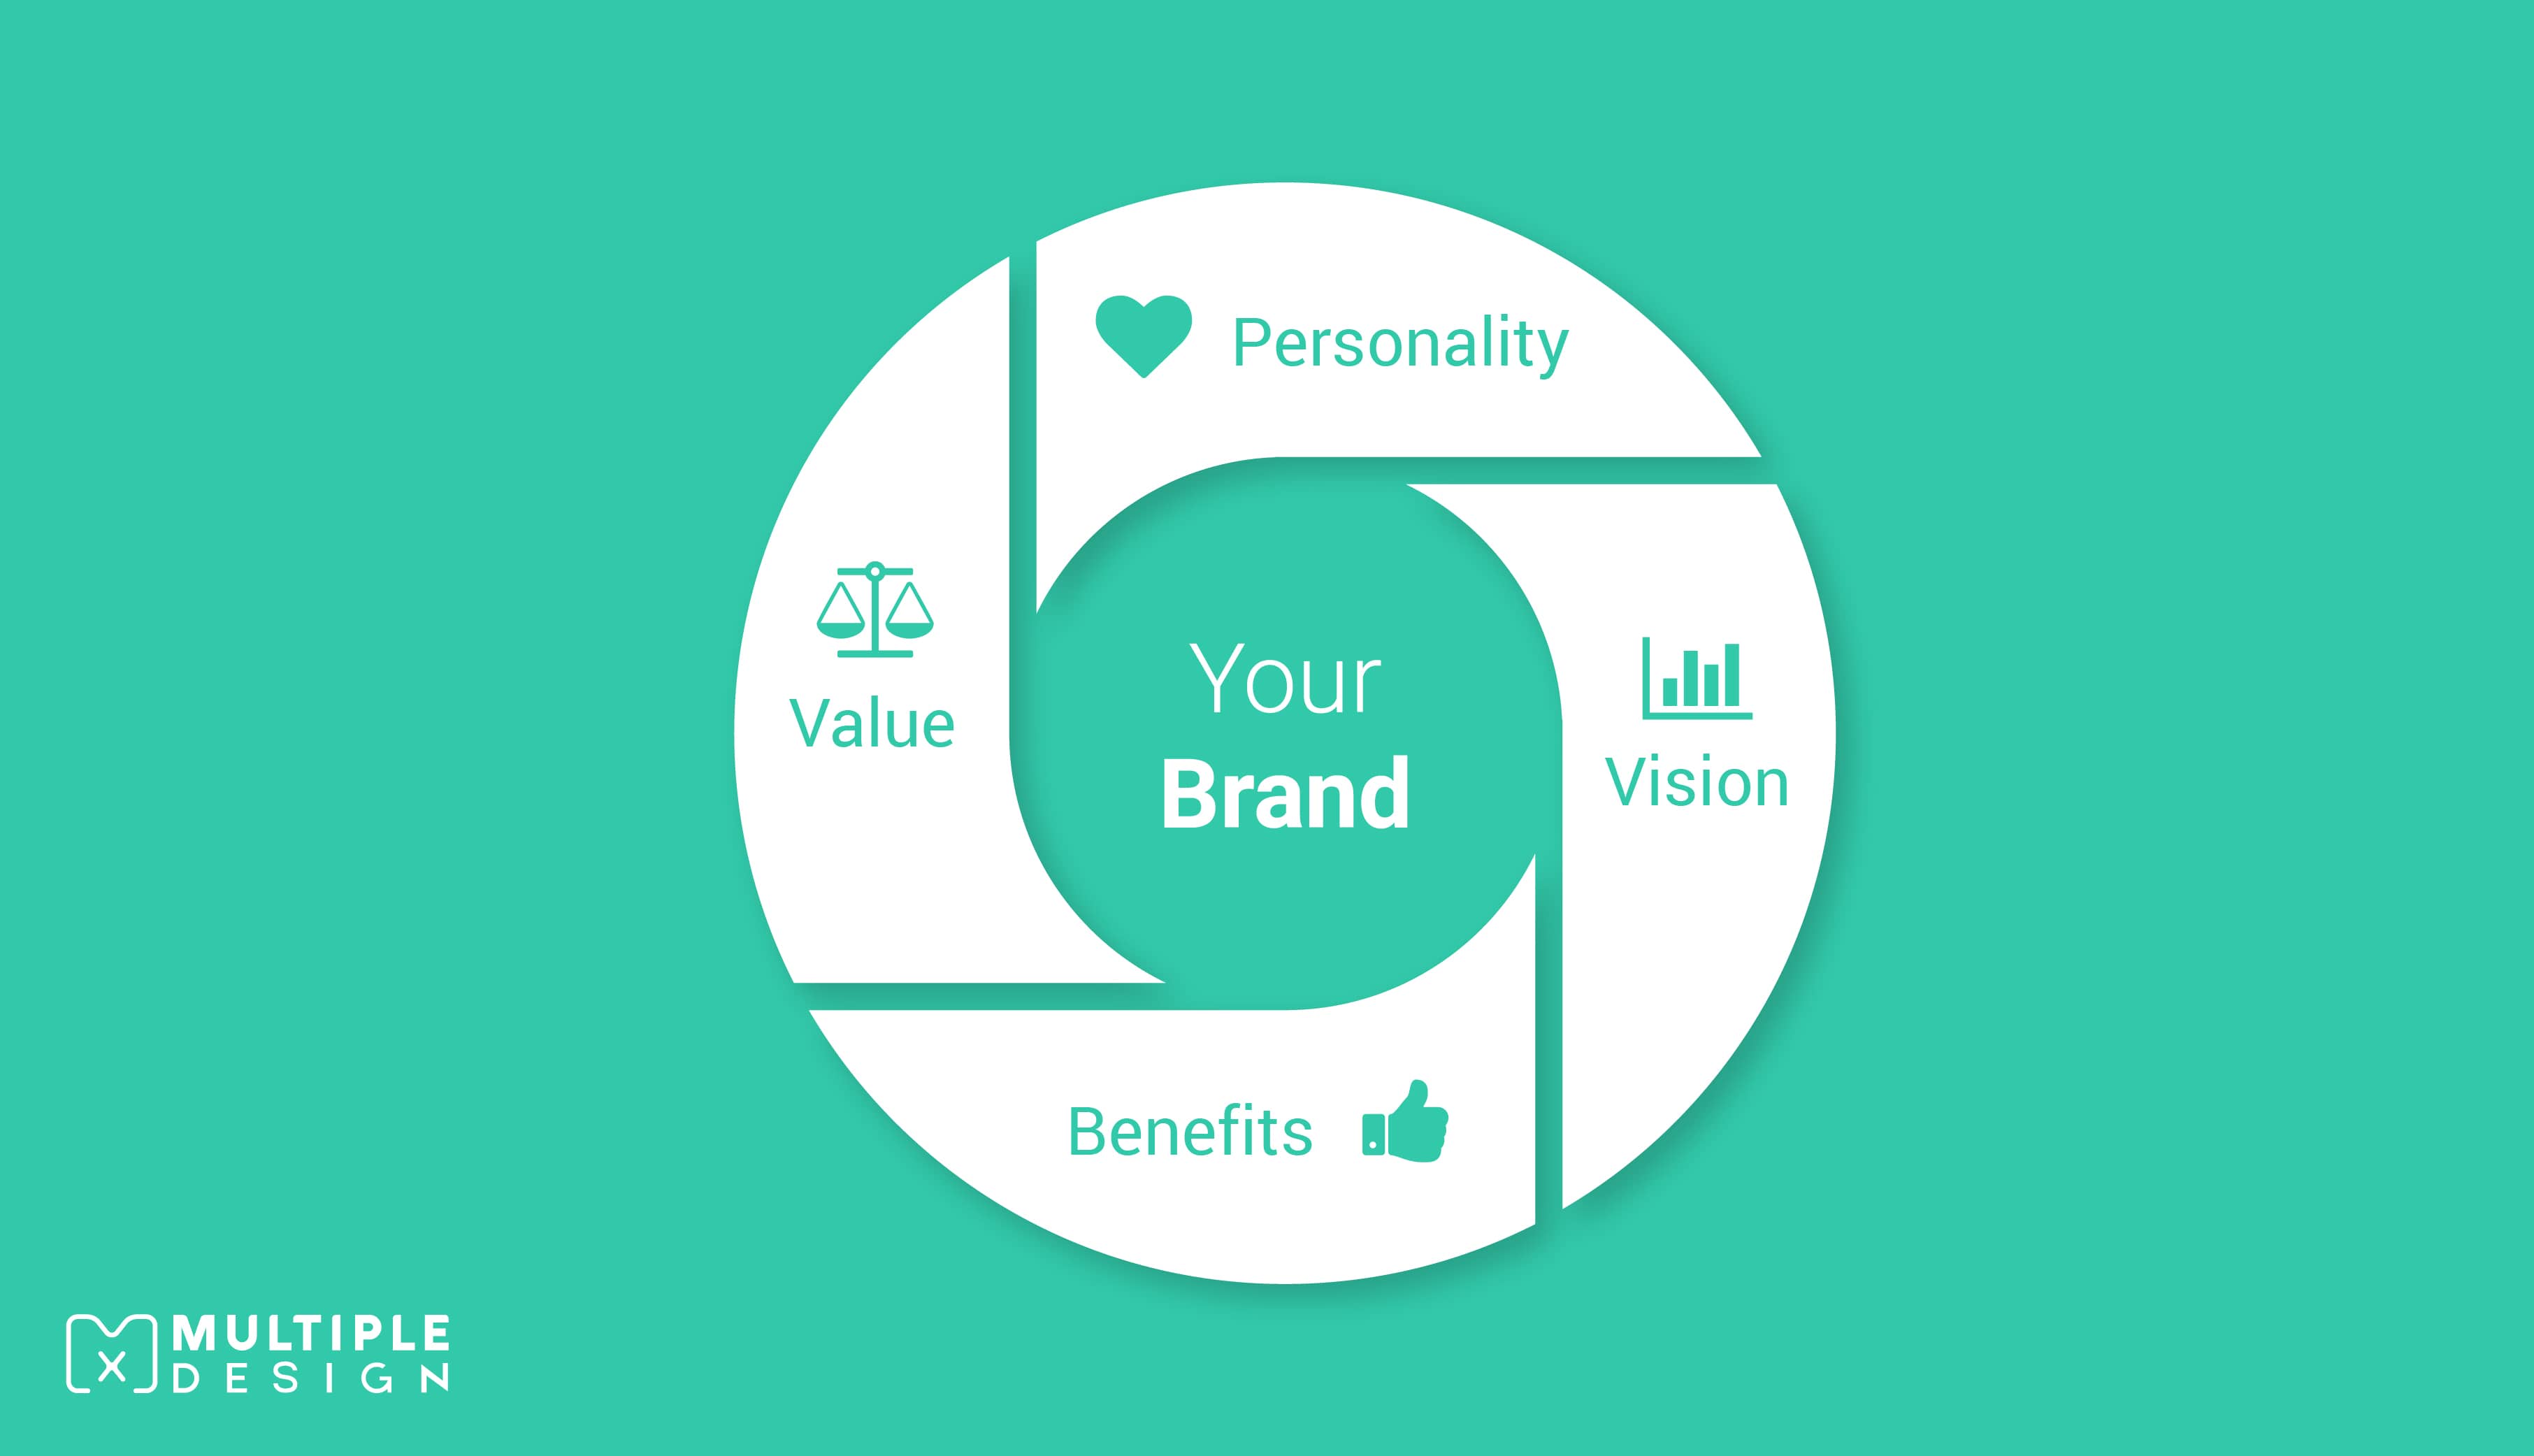 Your Brand - Personality, Vision, Value, Beneifits